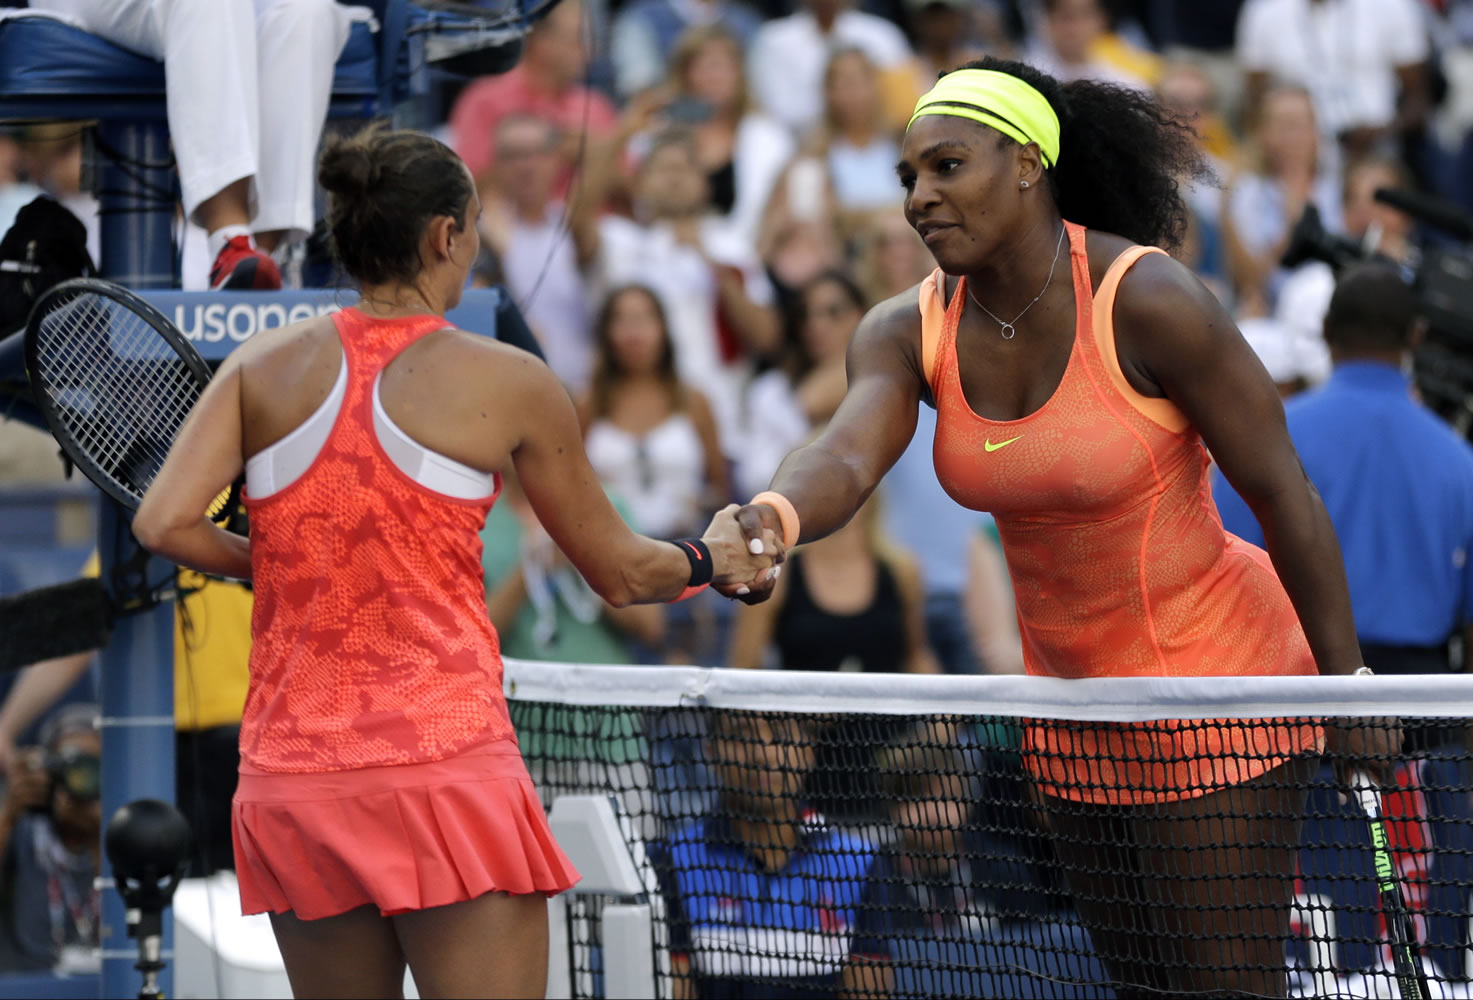 Serena Williams, right, shakes hands with Roberta Vinci, of Italy, after losing a semifinal match at the U.S. Open tennis tournament, Friday in New York.